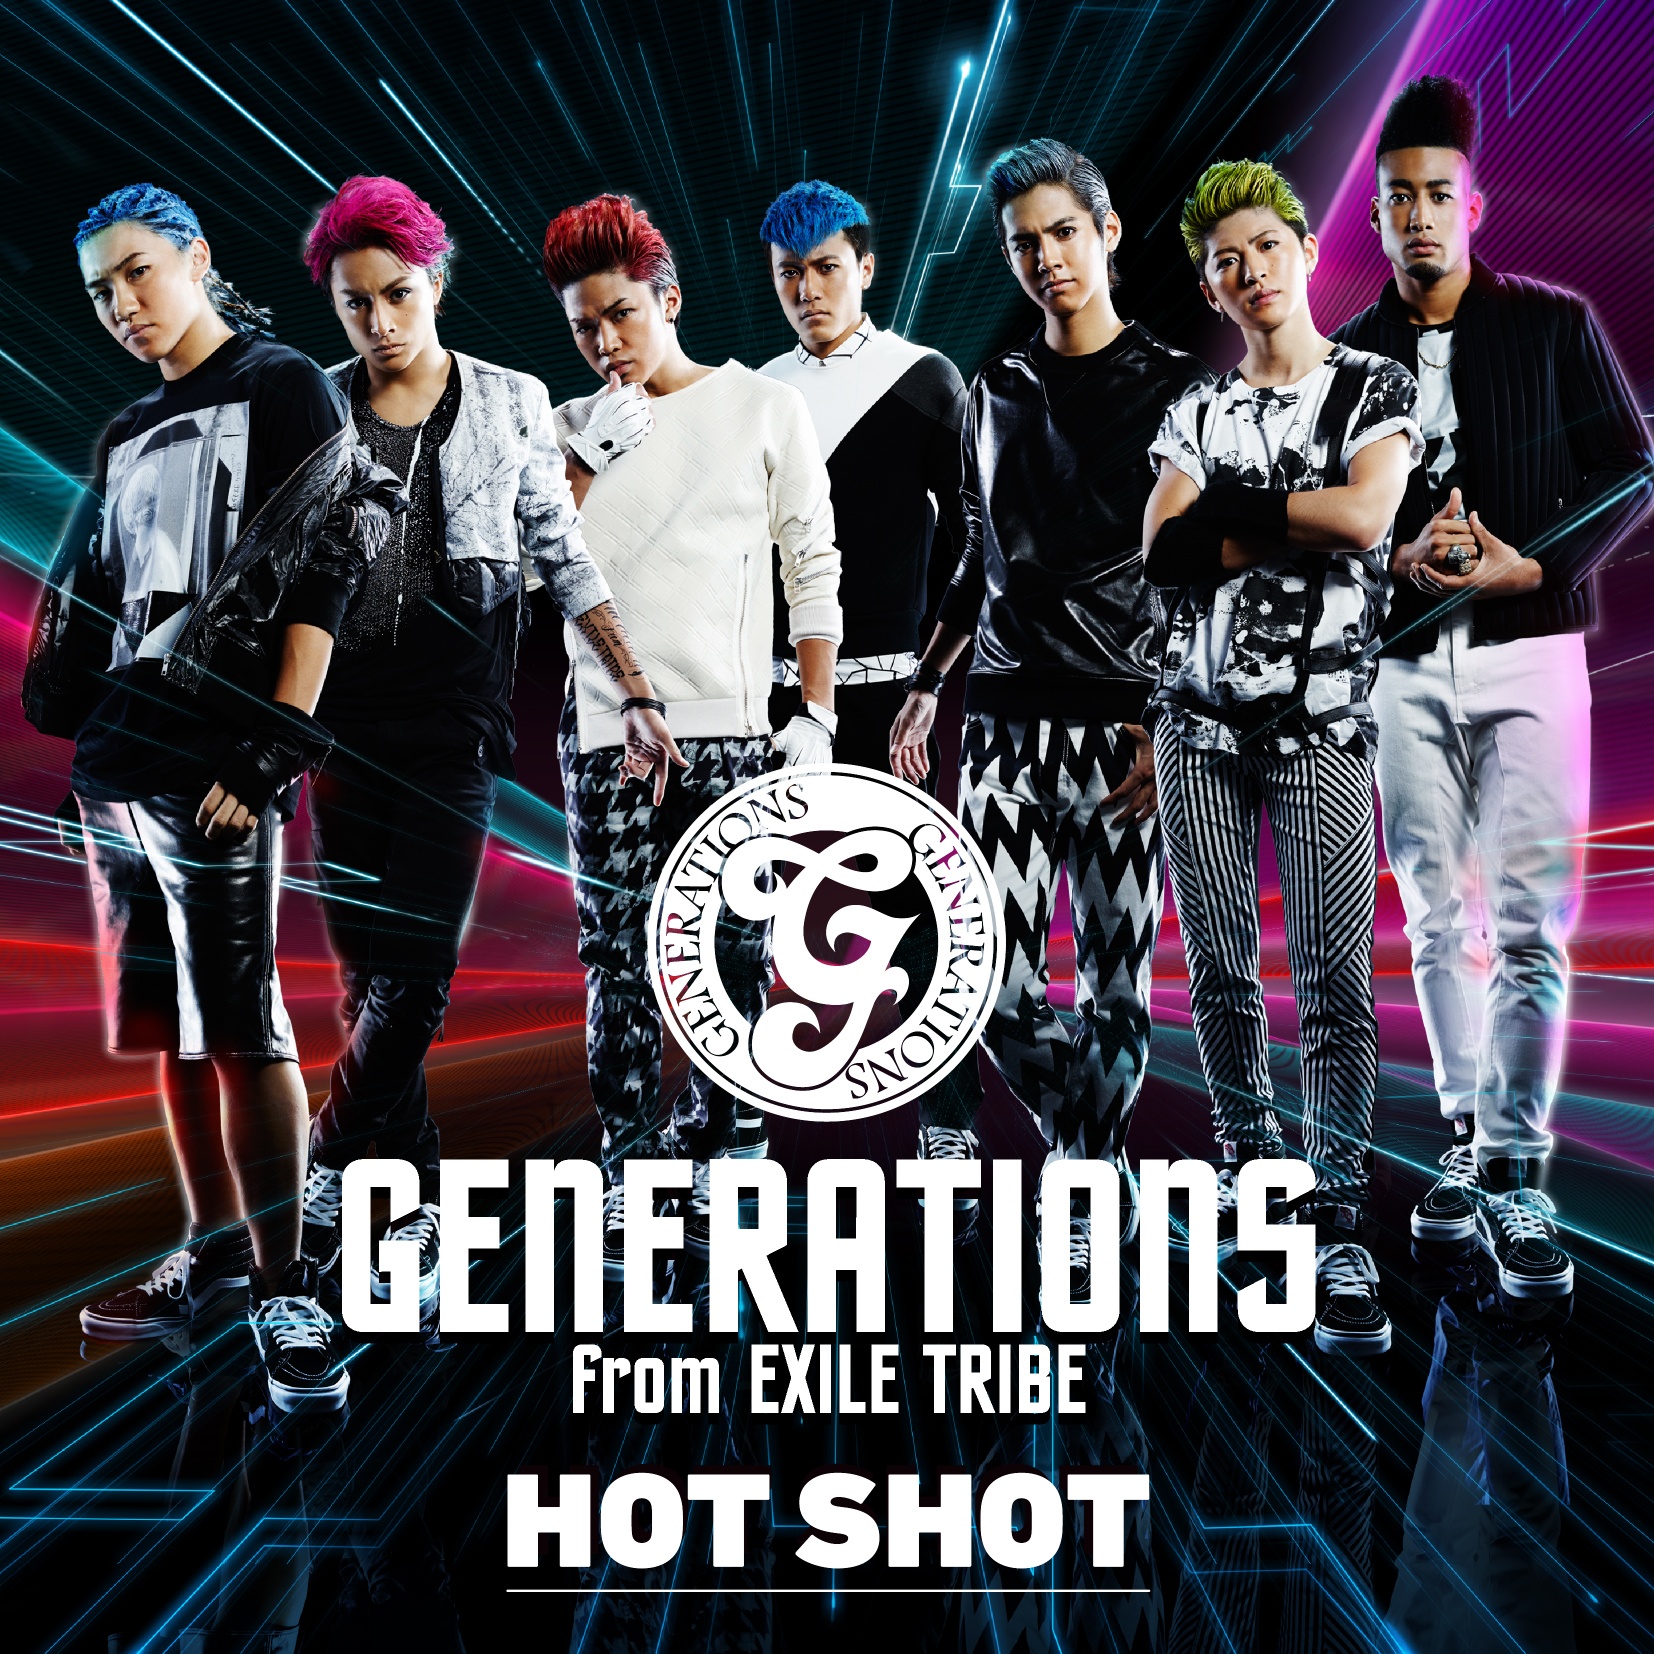 Hot Shot(GENERATIONS from EXILE TRIBE演唱歌曲)